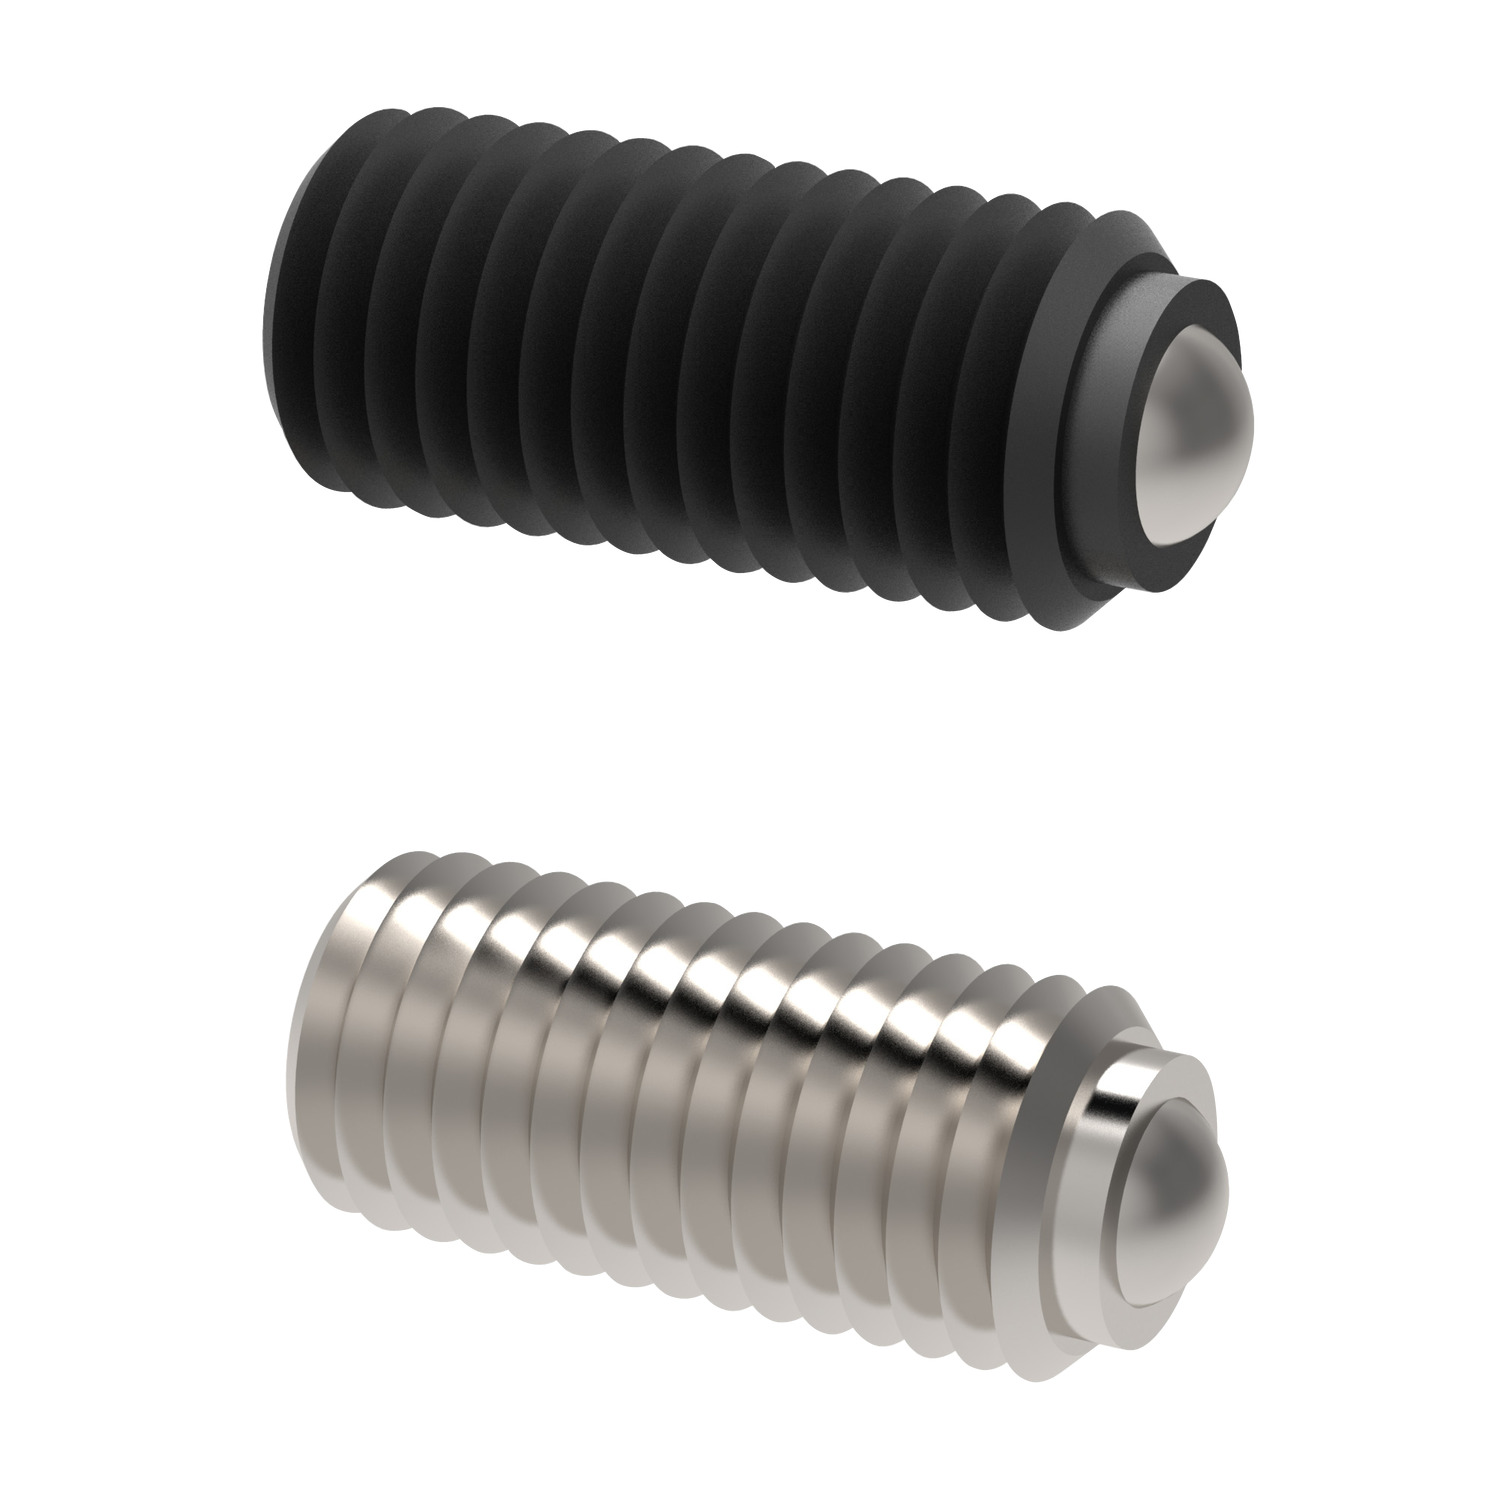 Product 34047, Thrust Screws - Headless -Torx drive ball ended - round - metal / 